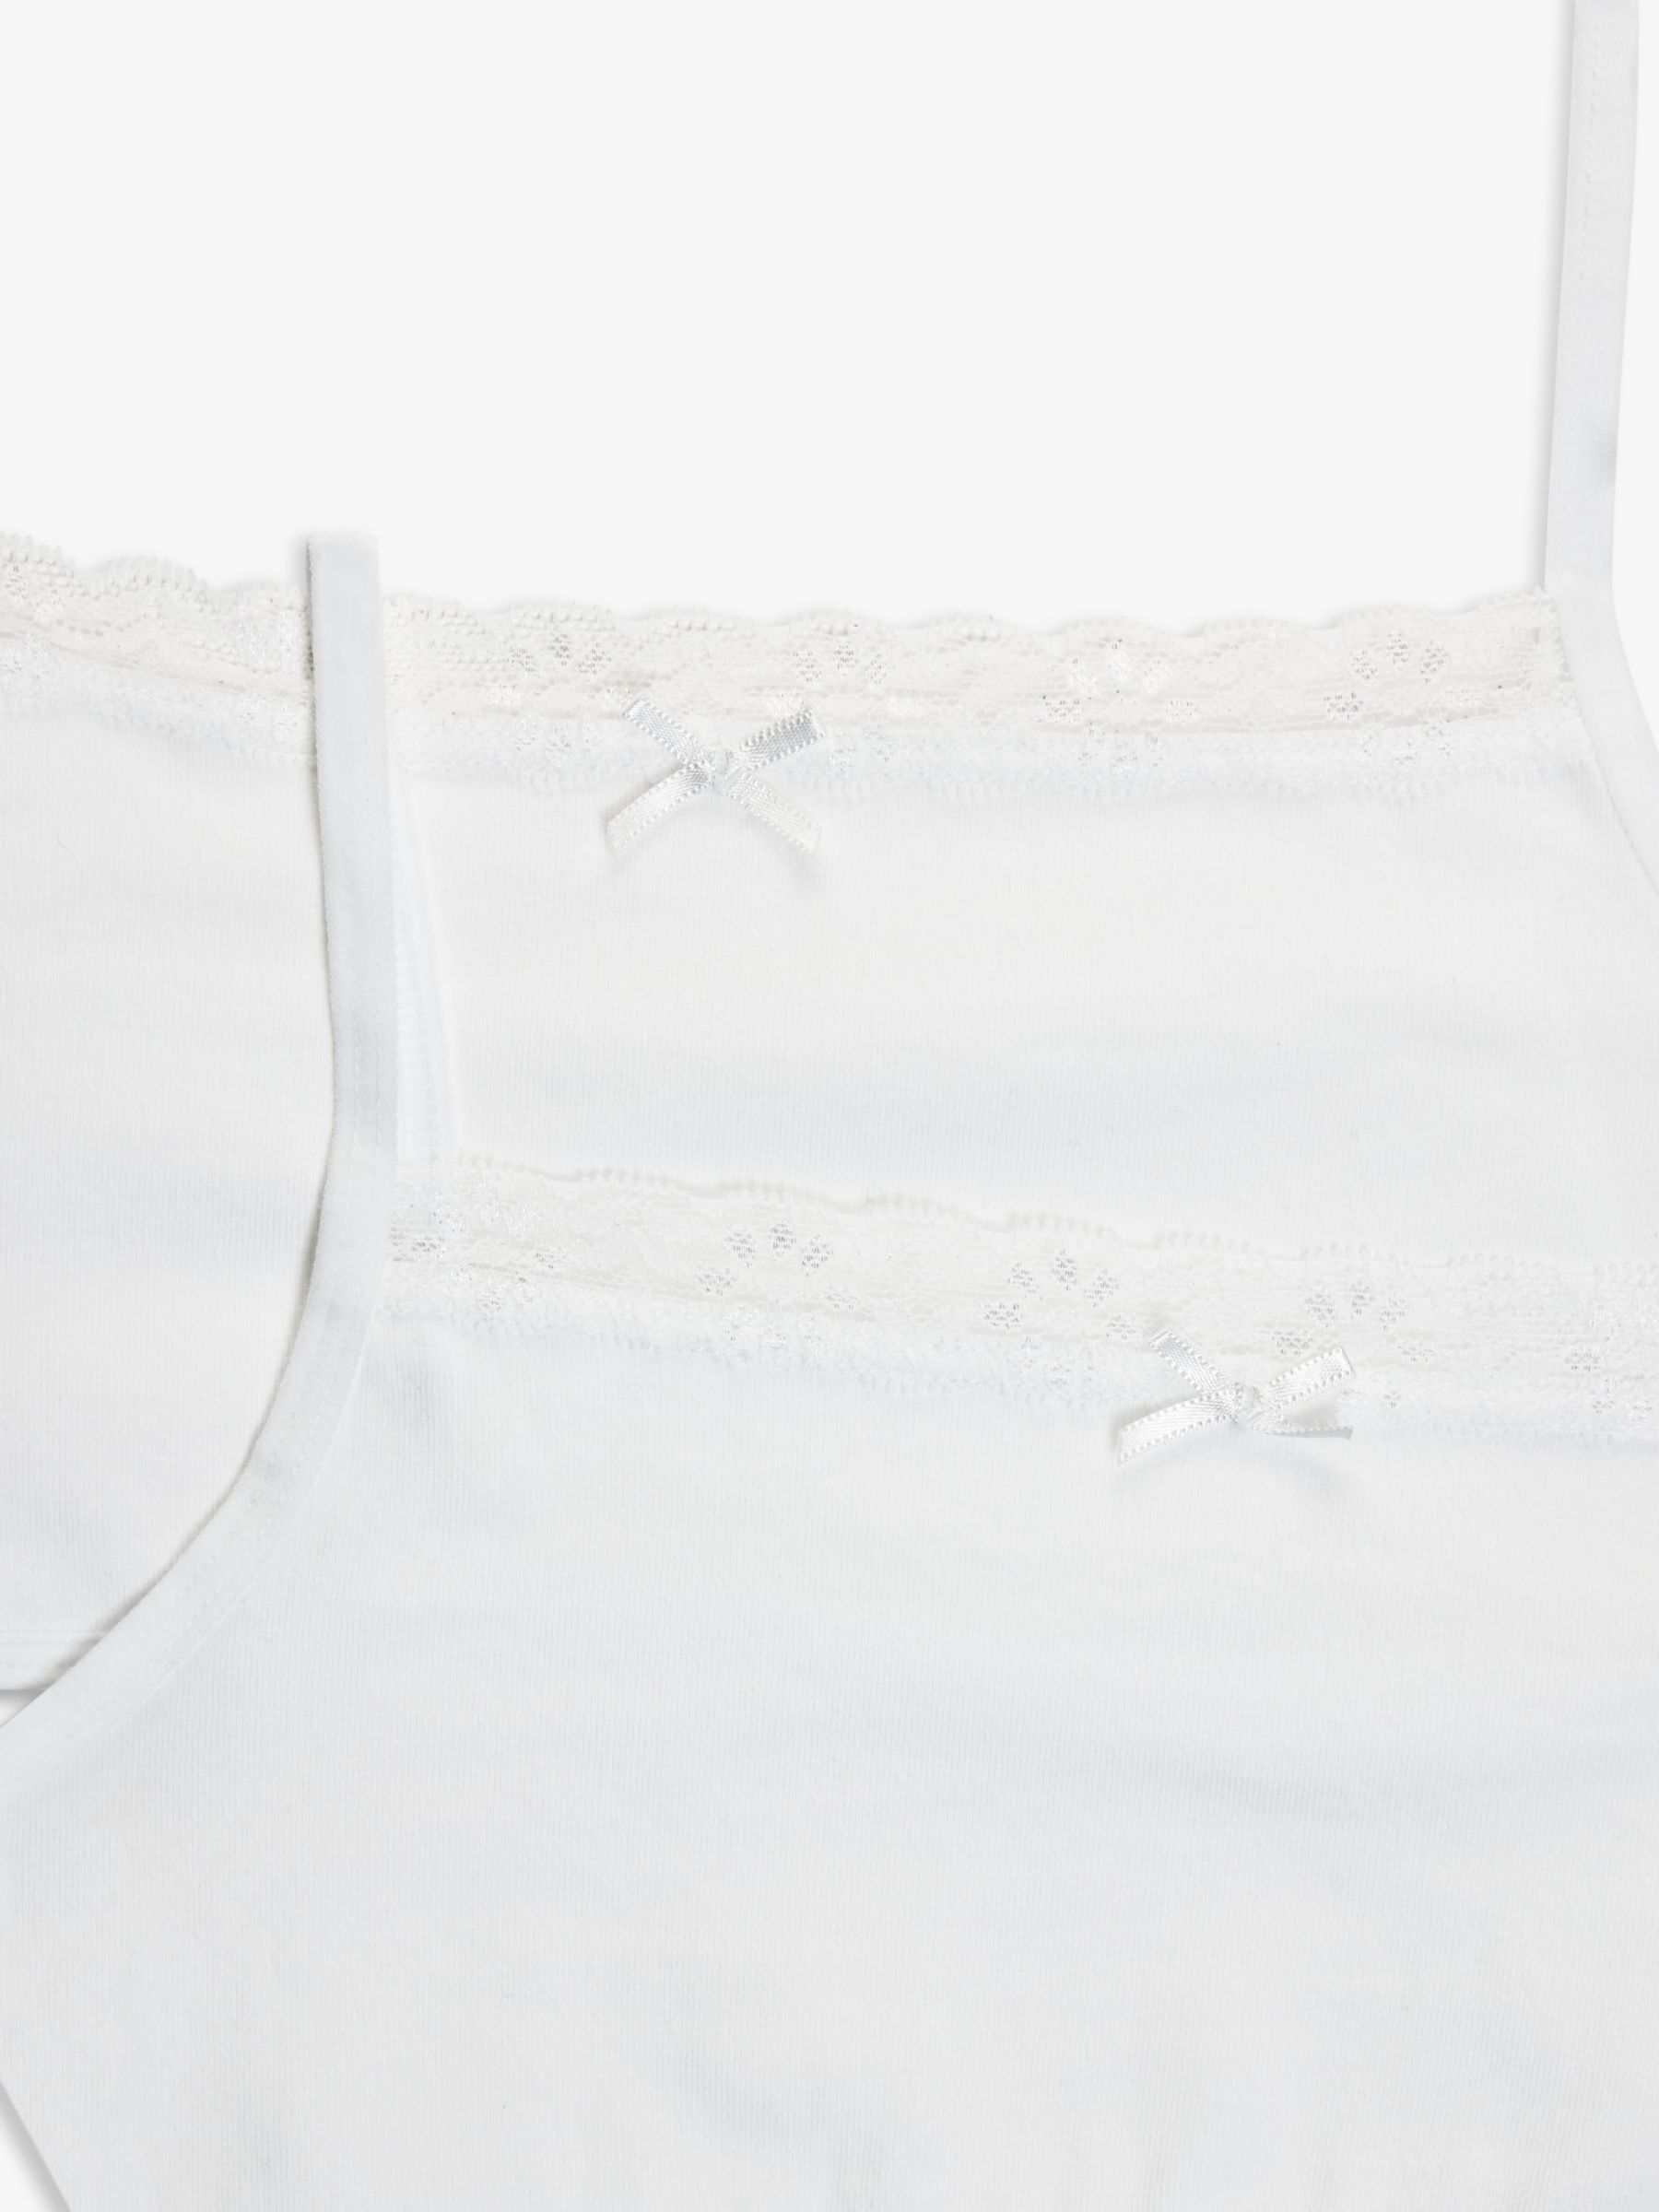 John Lewis Kids' Lace Crop Tops, Pack of 2, White, 12 years